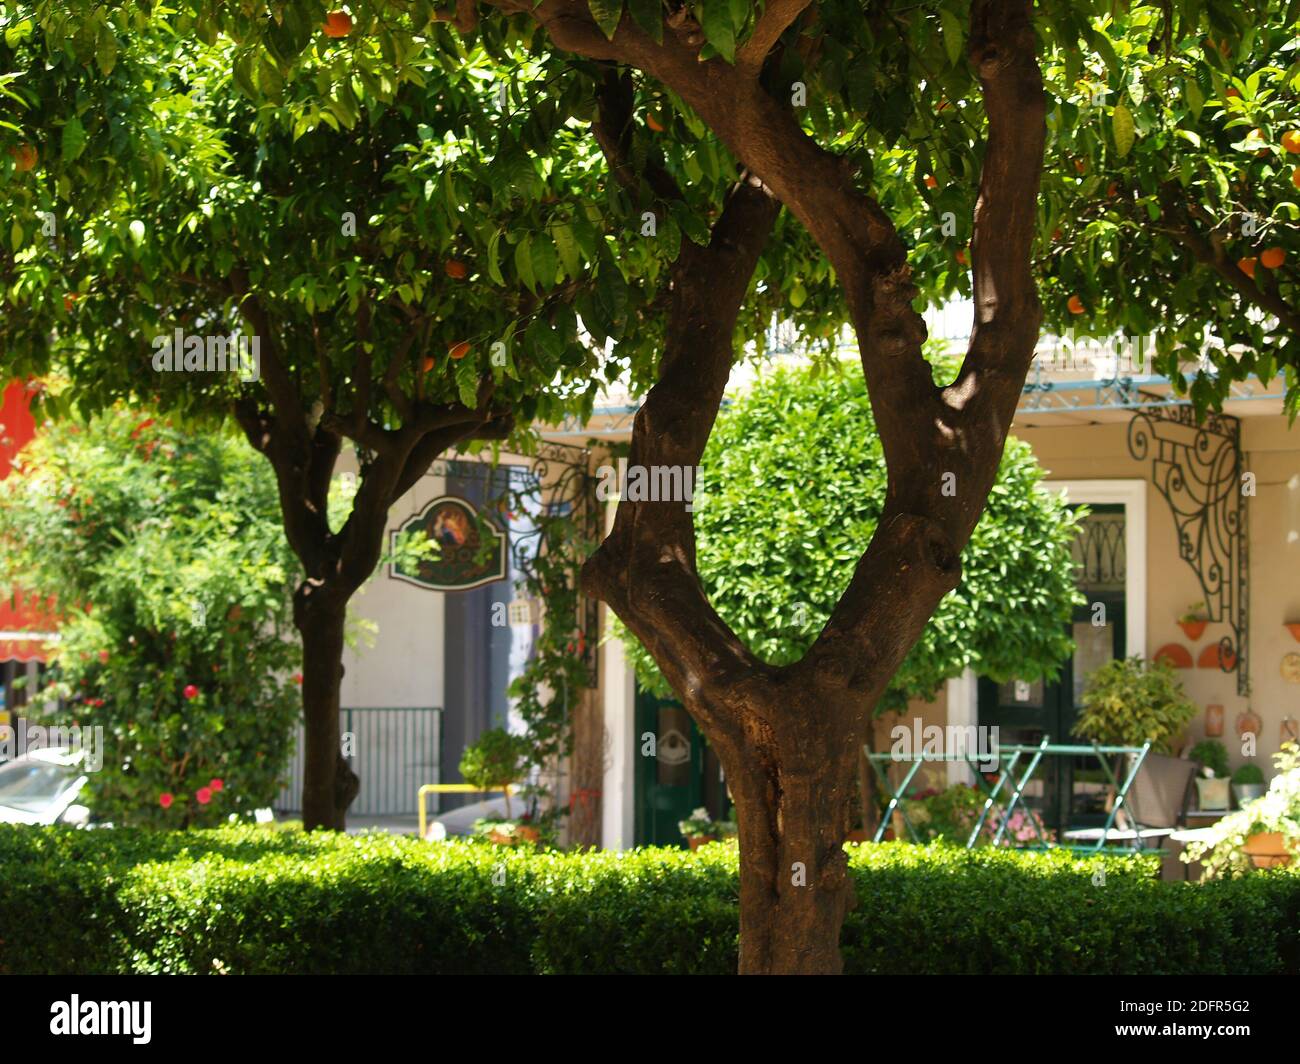 Oranges trees on the Trion Navarchon Street in Patras, Greece Stock Photo